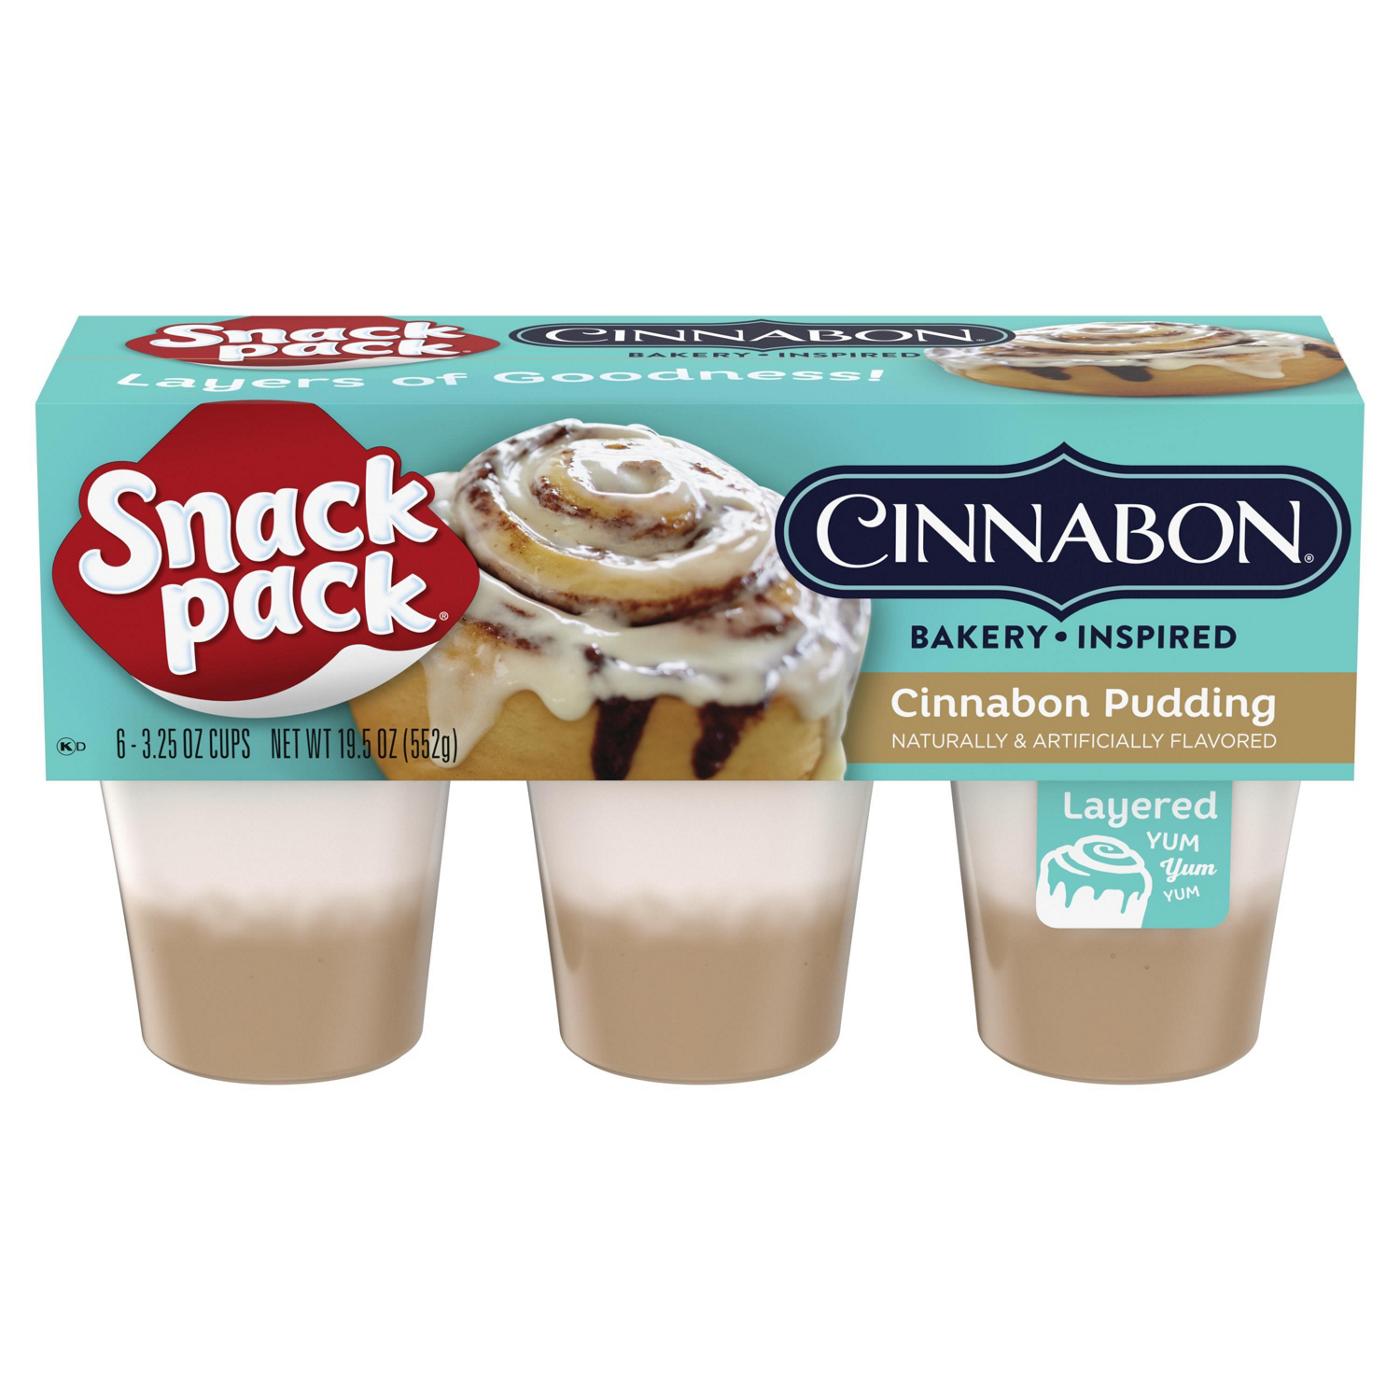 Snack Pack Cinnabon Pudding Cups; image 1 of 2